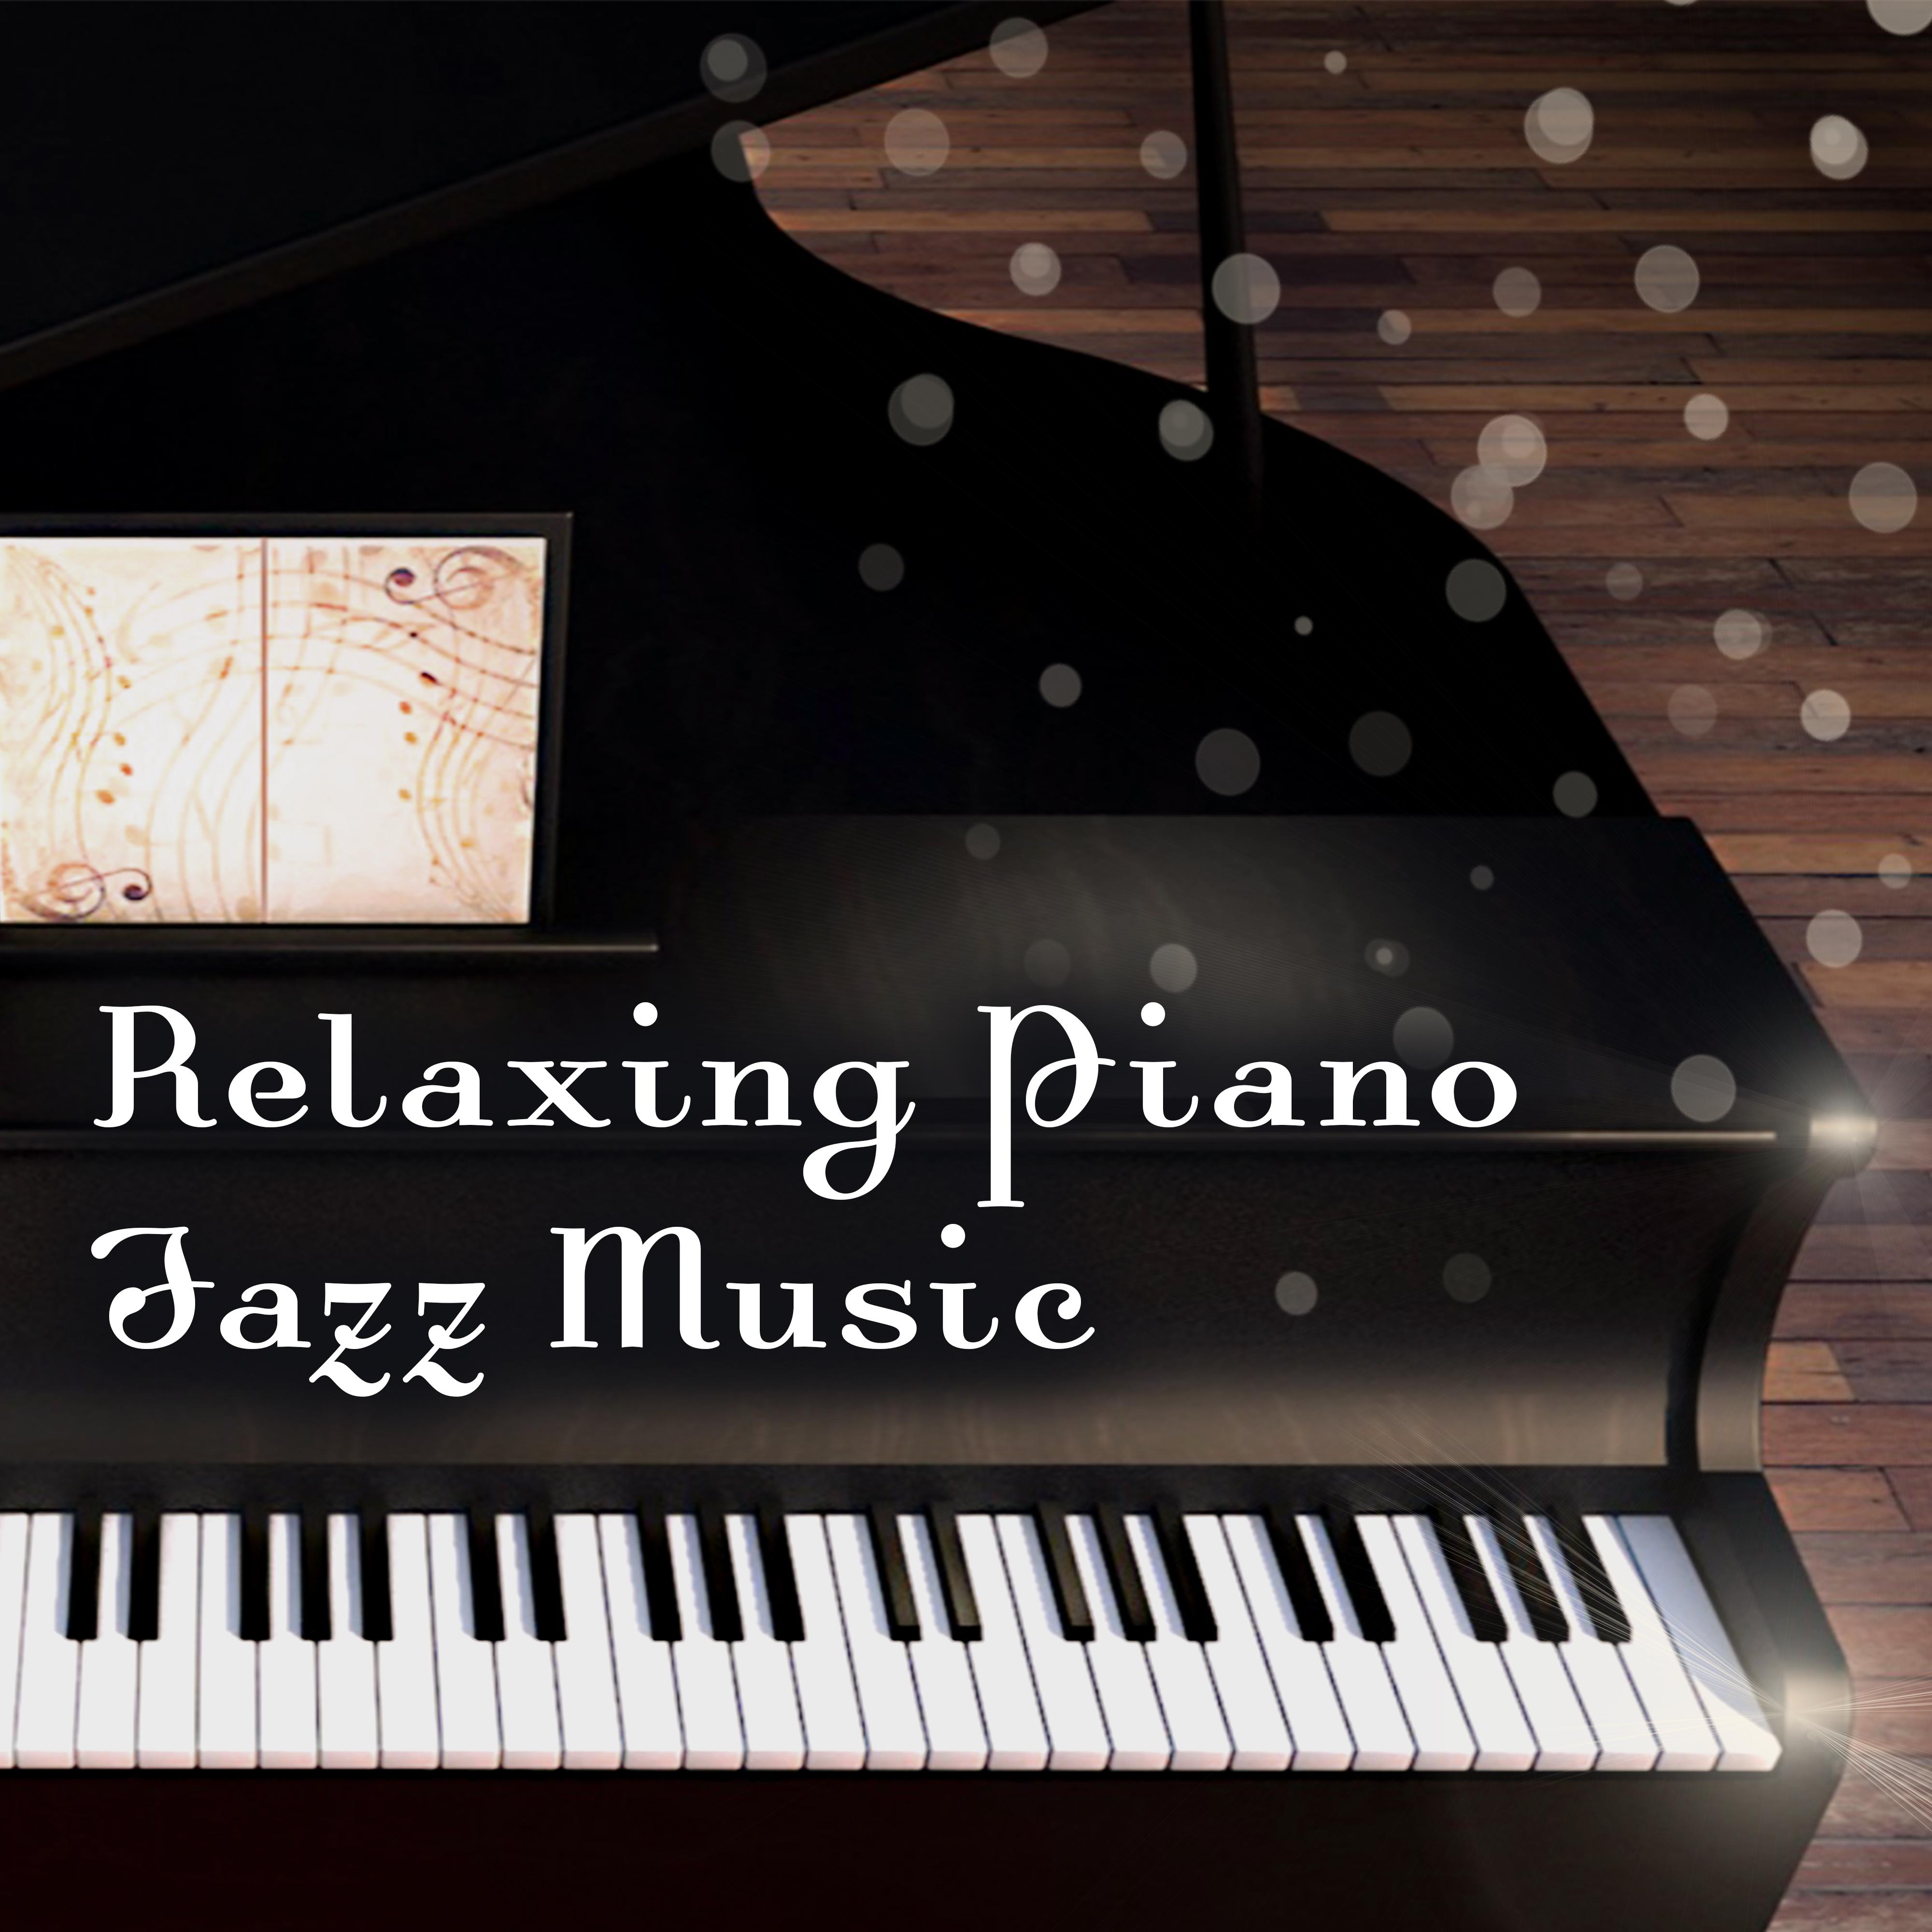 Relaxing Piano Jazz Music  Soft Sounds to Rest, Jazz Music to Relax, Moonlight Piano, Soothing Jazz